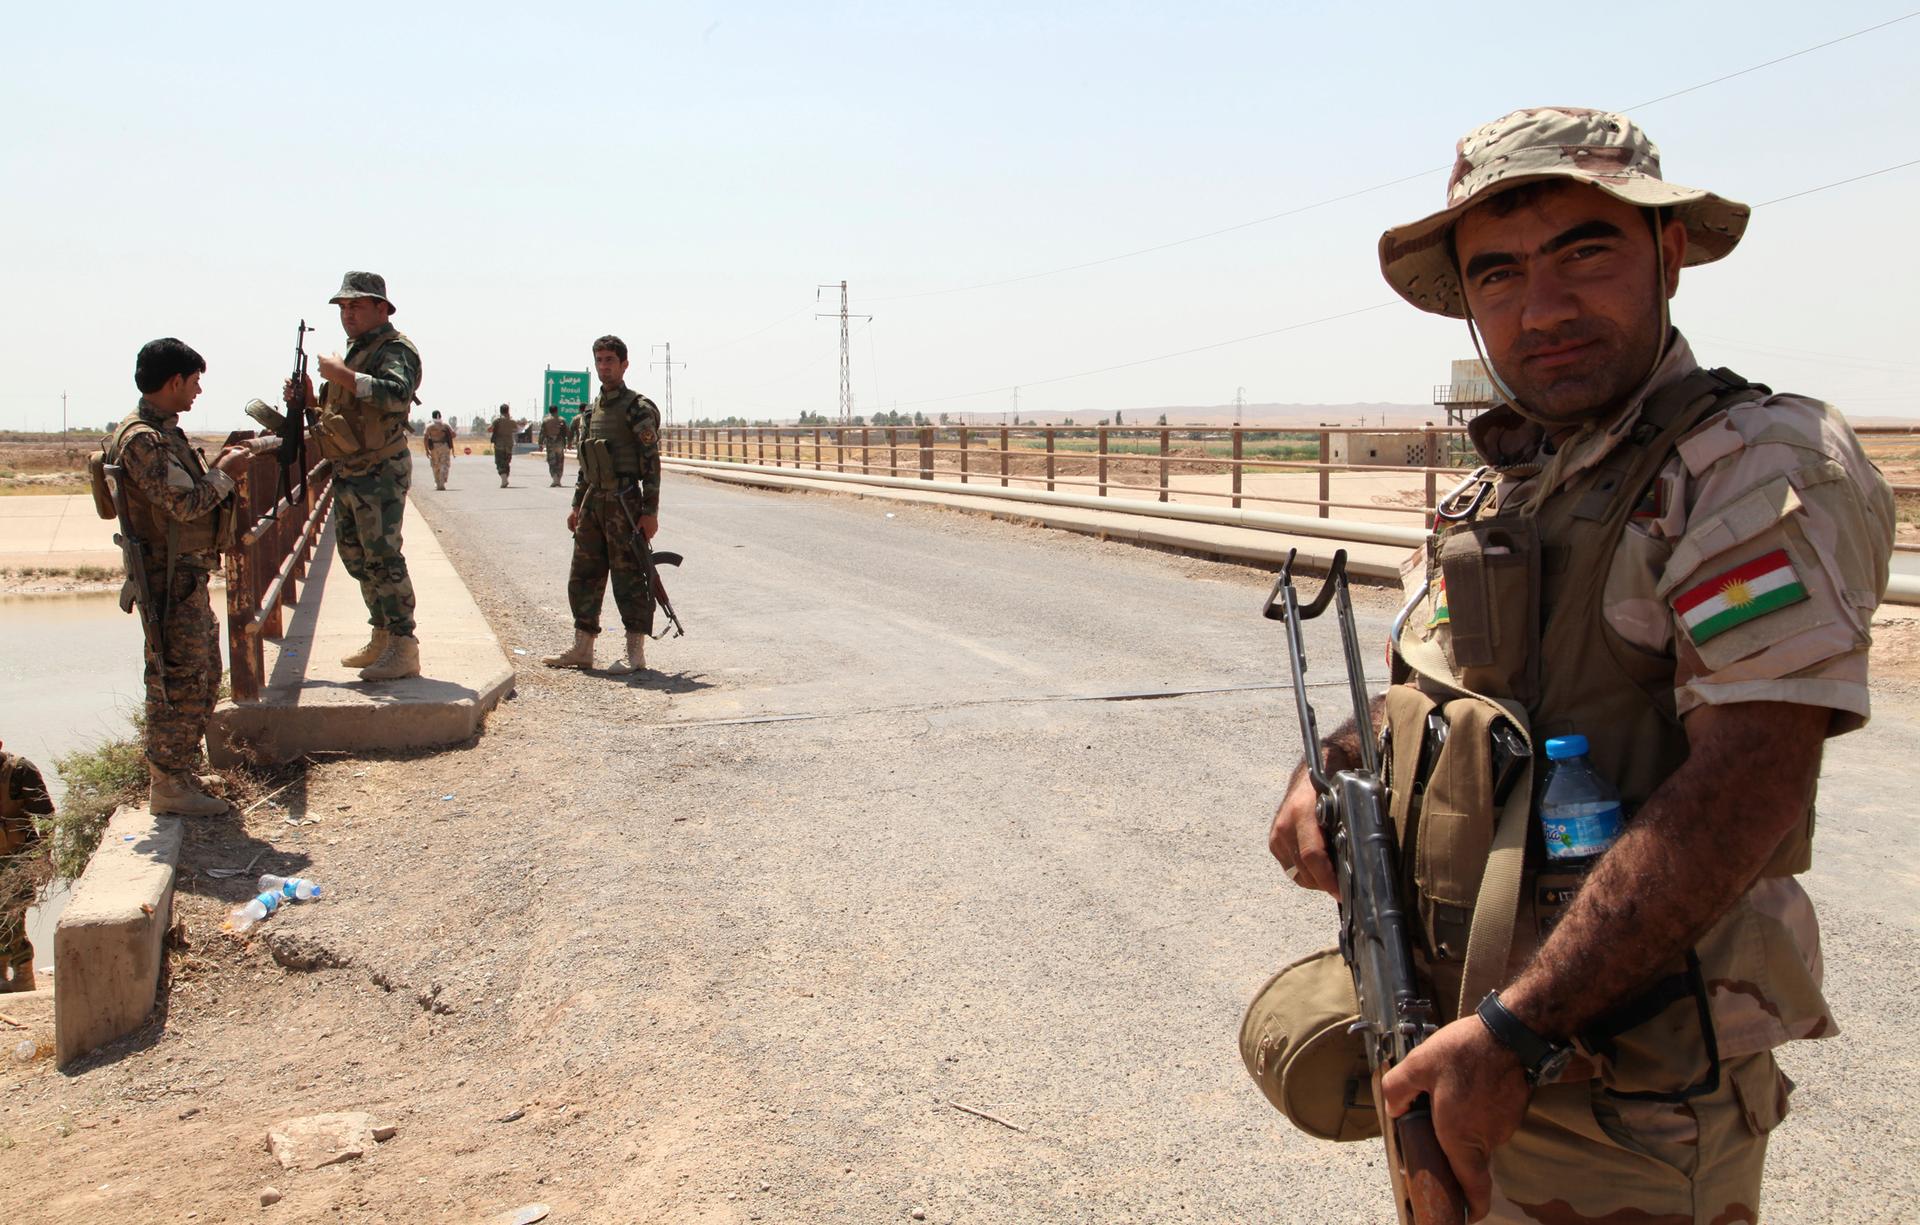 Members of the Kurdish security forces occupied Kirkuk province last week, after Iraqi government forces fled. 